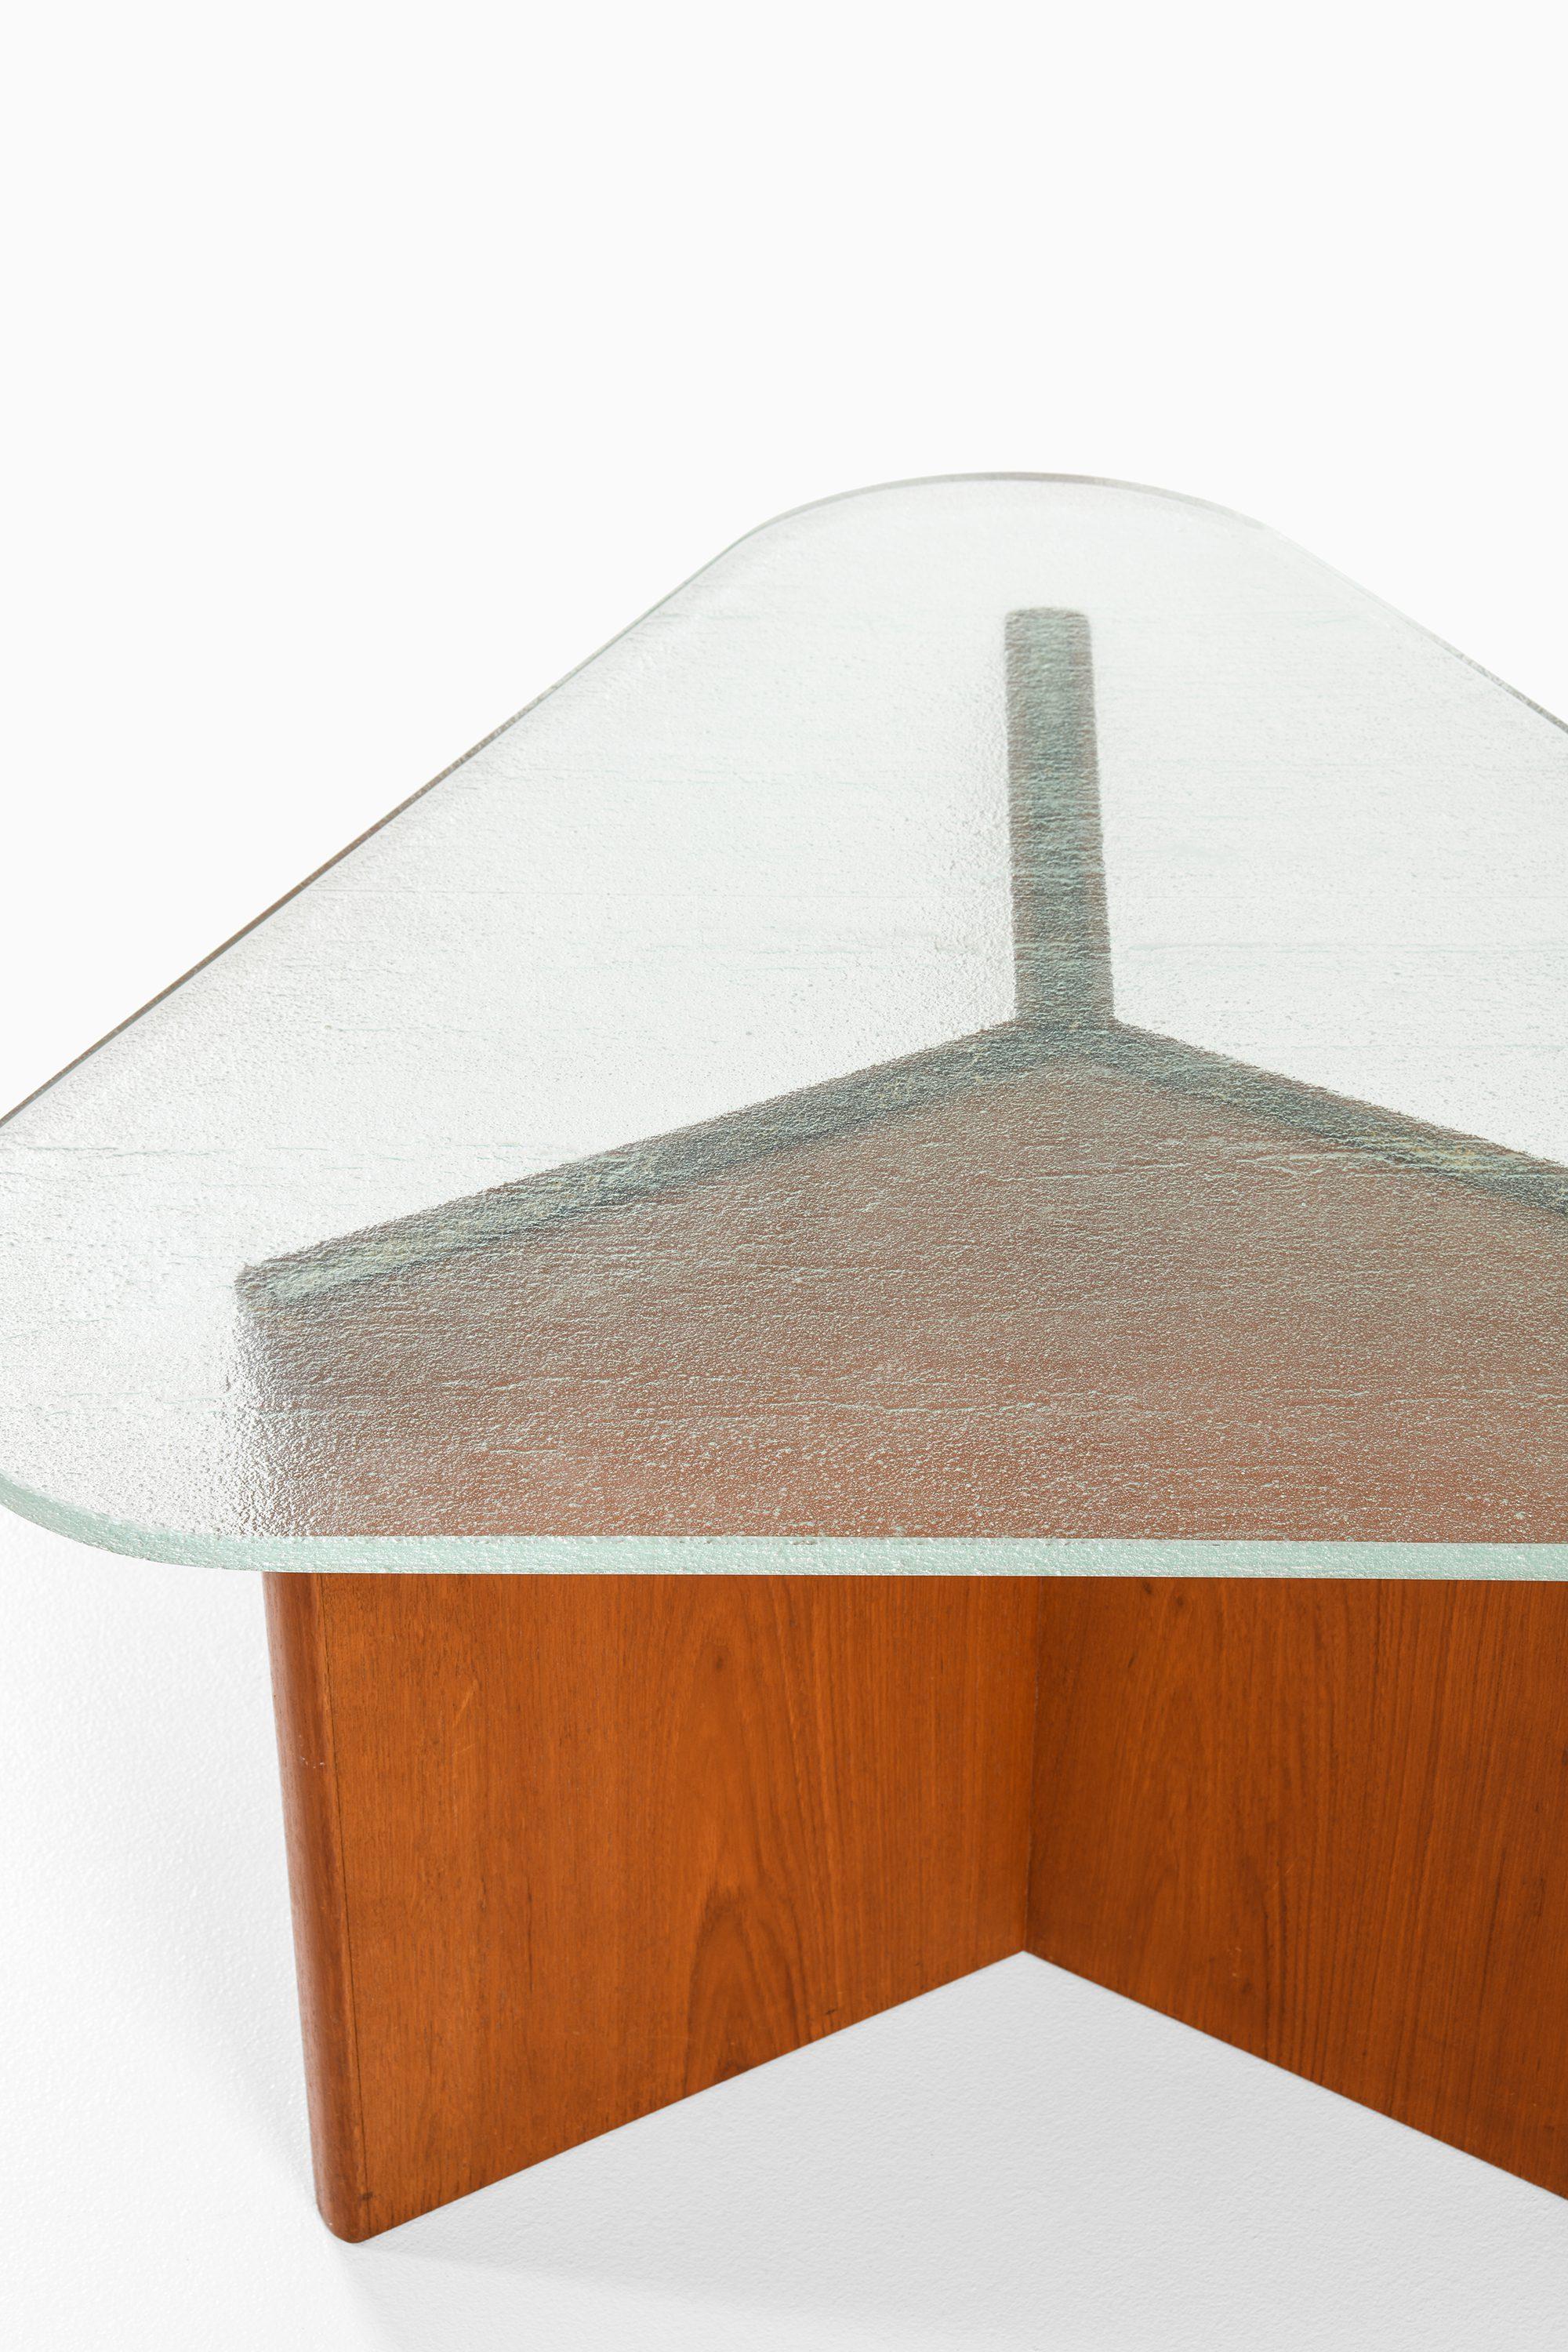 Triangular Coffee Table in Elm and Raw Glass Top by Axel Einar Hjorth, 1940's In Good Condition For Sale In Limhamn, Skåne län